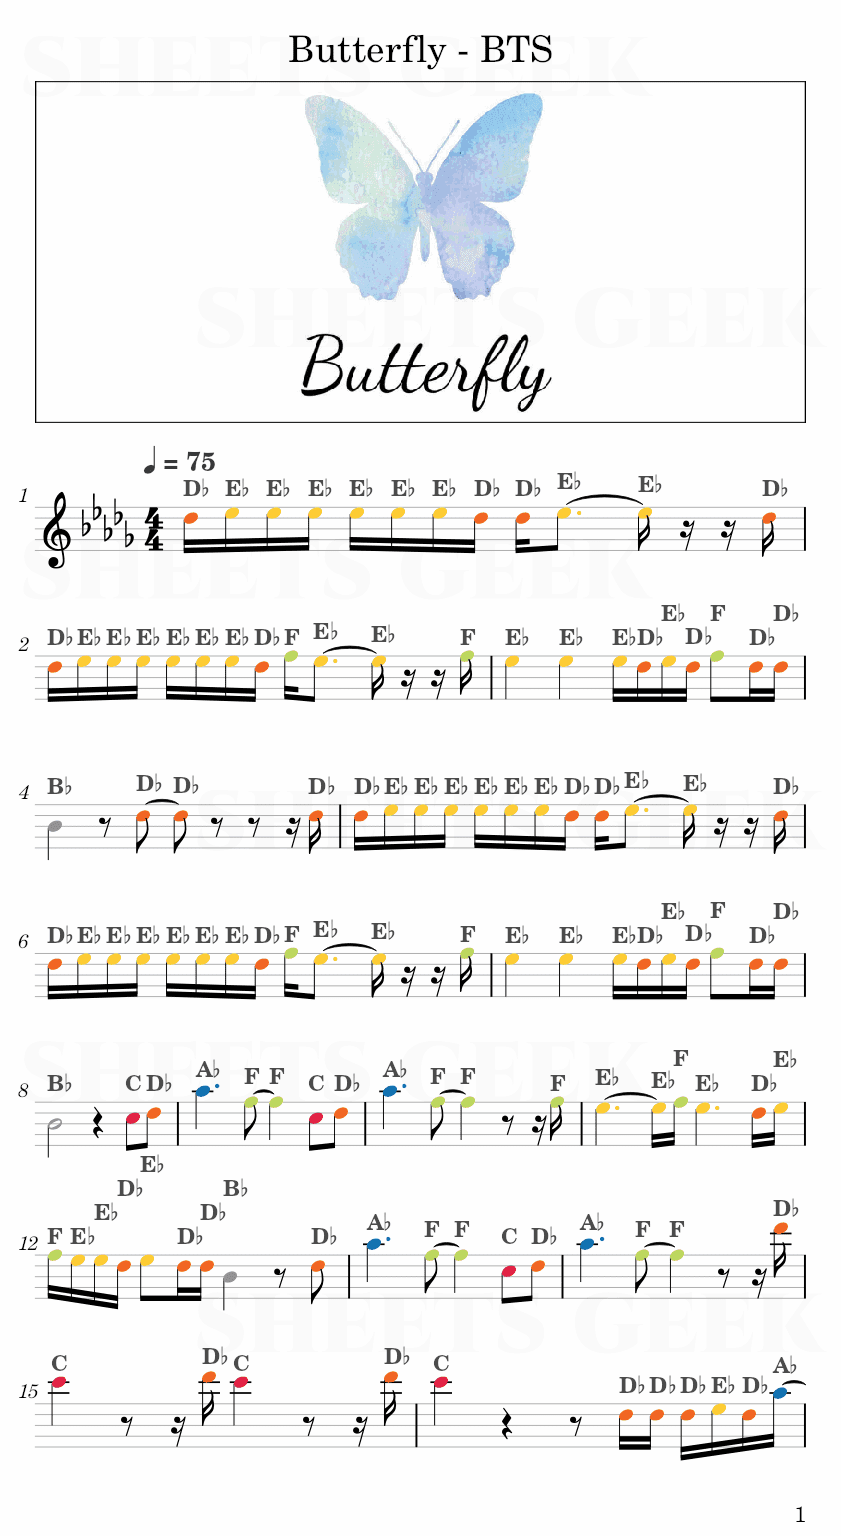 Butterfly - BTS Easy Sheet Music Free for piano, keyboard, flute, violin, sax, cello page 1